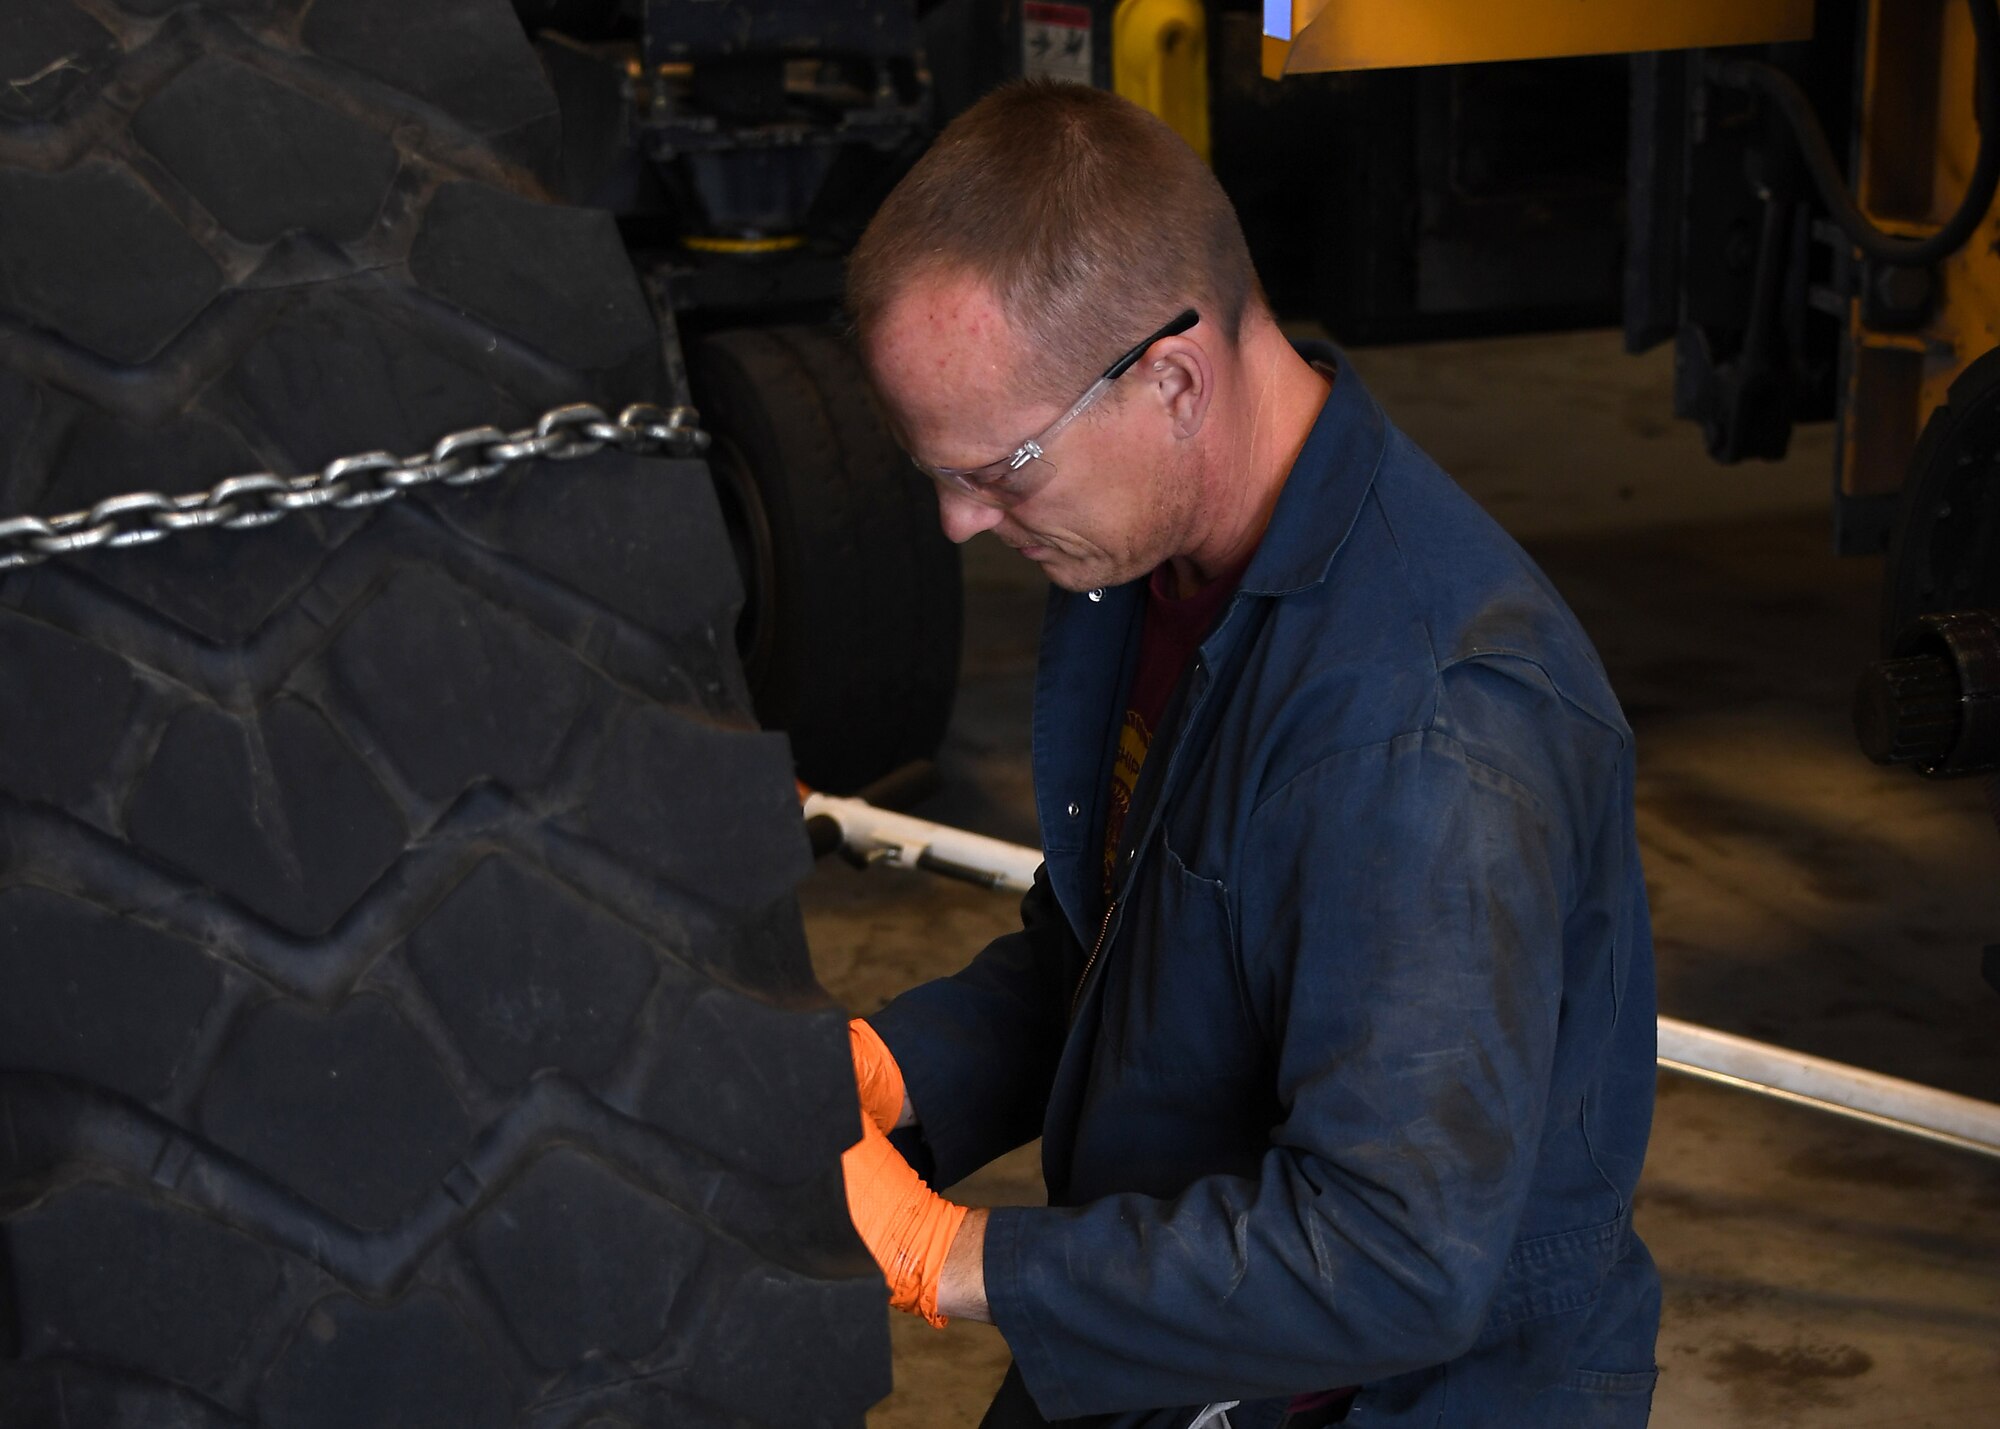 Paul Holien, 319th Logistics Readiness Squadron heavy equipment mobile mechanic, inspects a removed tire belonging to a large snow plow August 28, 2018, on Grand Forks Air Force Base, North Dakota. In addition to snow plows, the 319 LRS also maintains vehicles to include fire trucks, aerial lift trucks and additional government vehicles utilized by other squadrons around base. (U.S. Air Force photo by Airman 1st Class Elora J. Martinez)